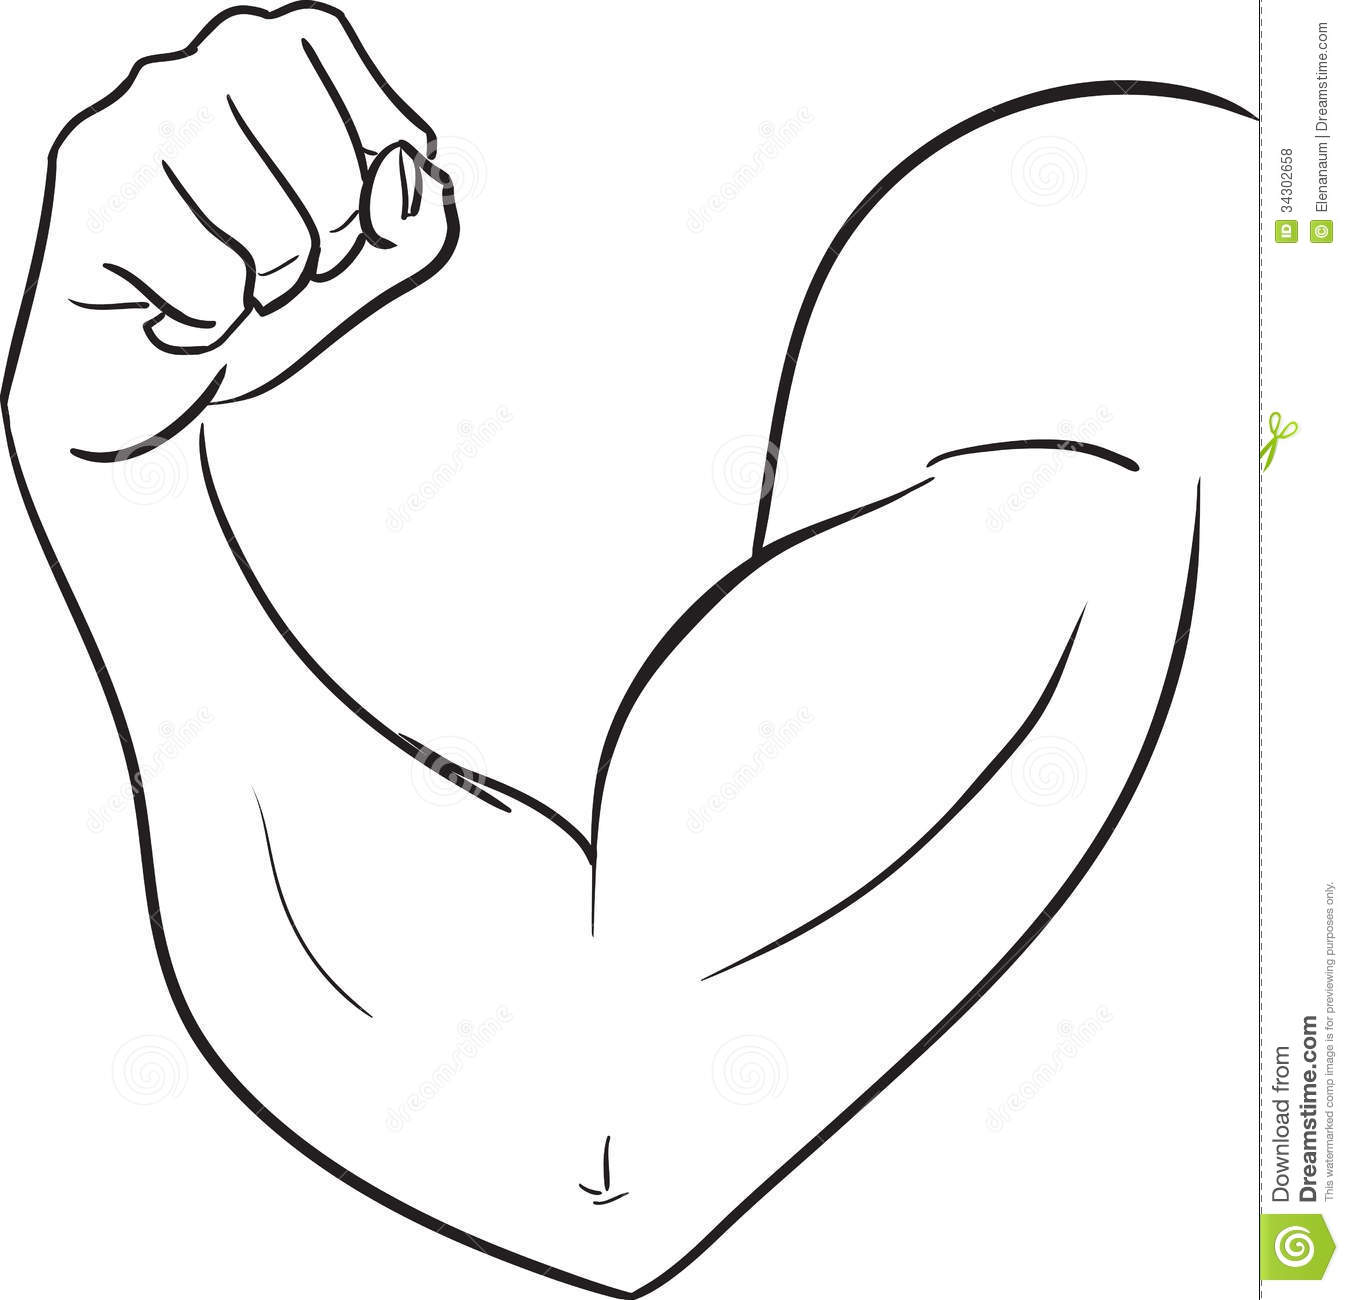 Arms clipart elbow, Arms elbow Transparent FREE for download